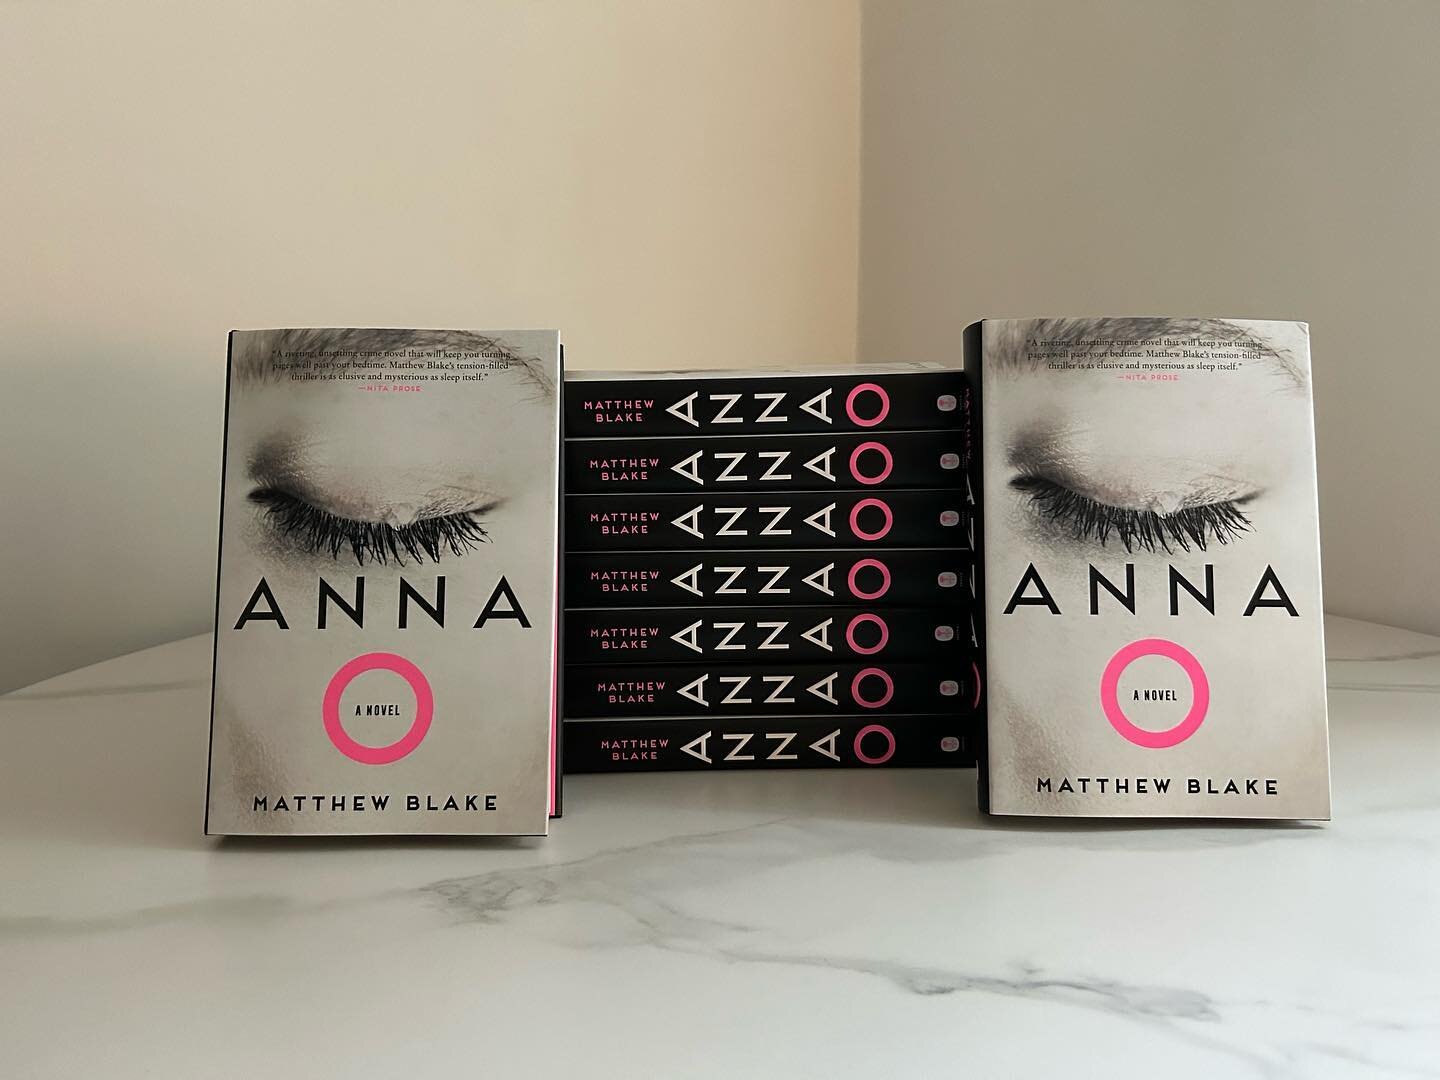 The moment you wait a lifetime for. Absolutely over the moon to see these final 🇺🇸 hardback editions of #AnnaO fresh from the printer. Four weeks to go! 
@harperbooks @harpercollins @bookprmom